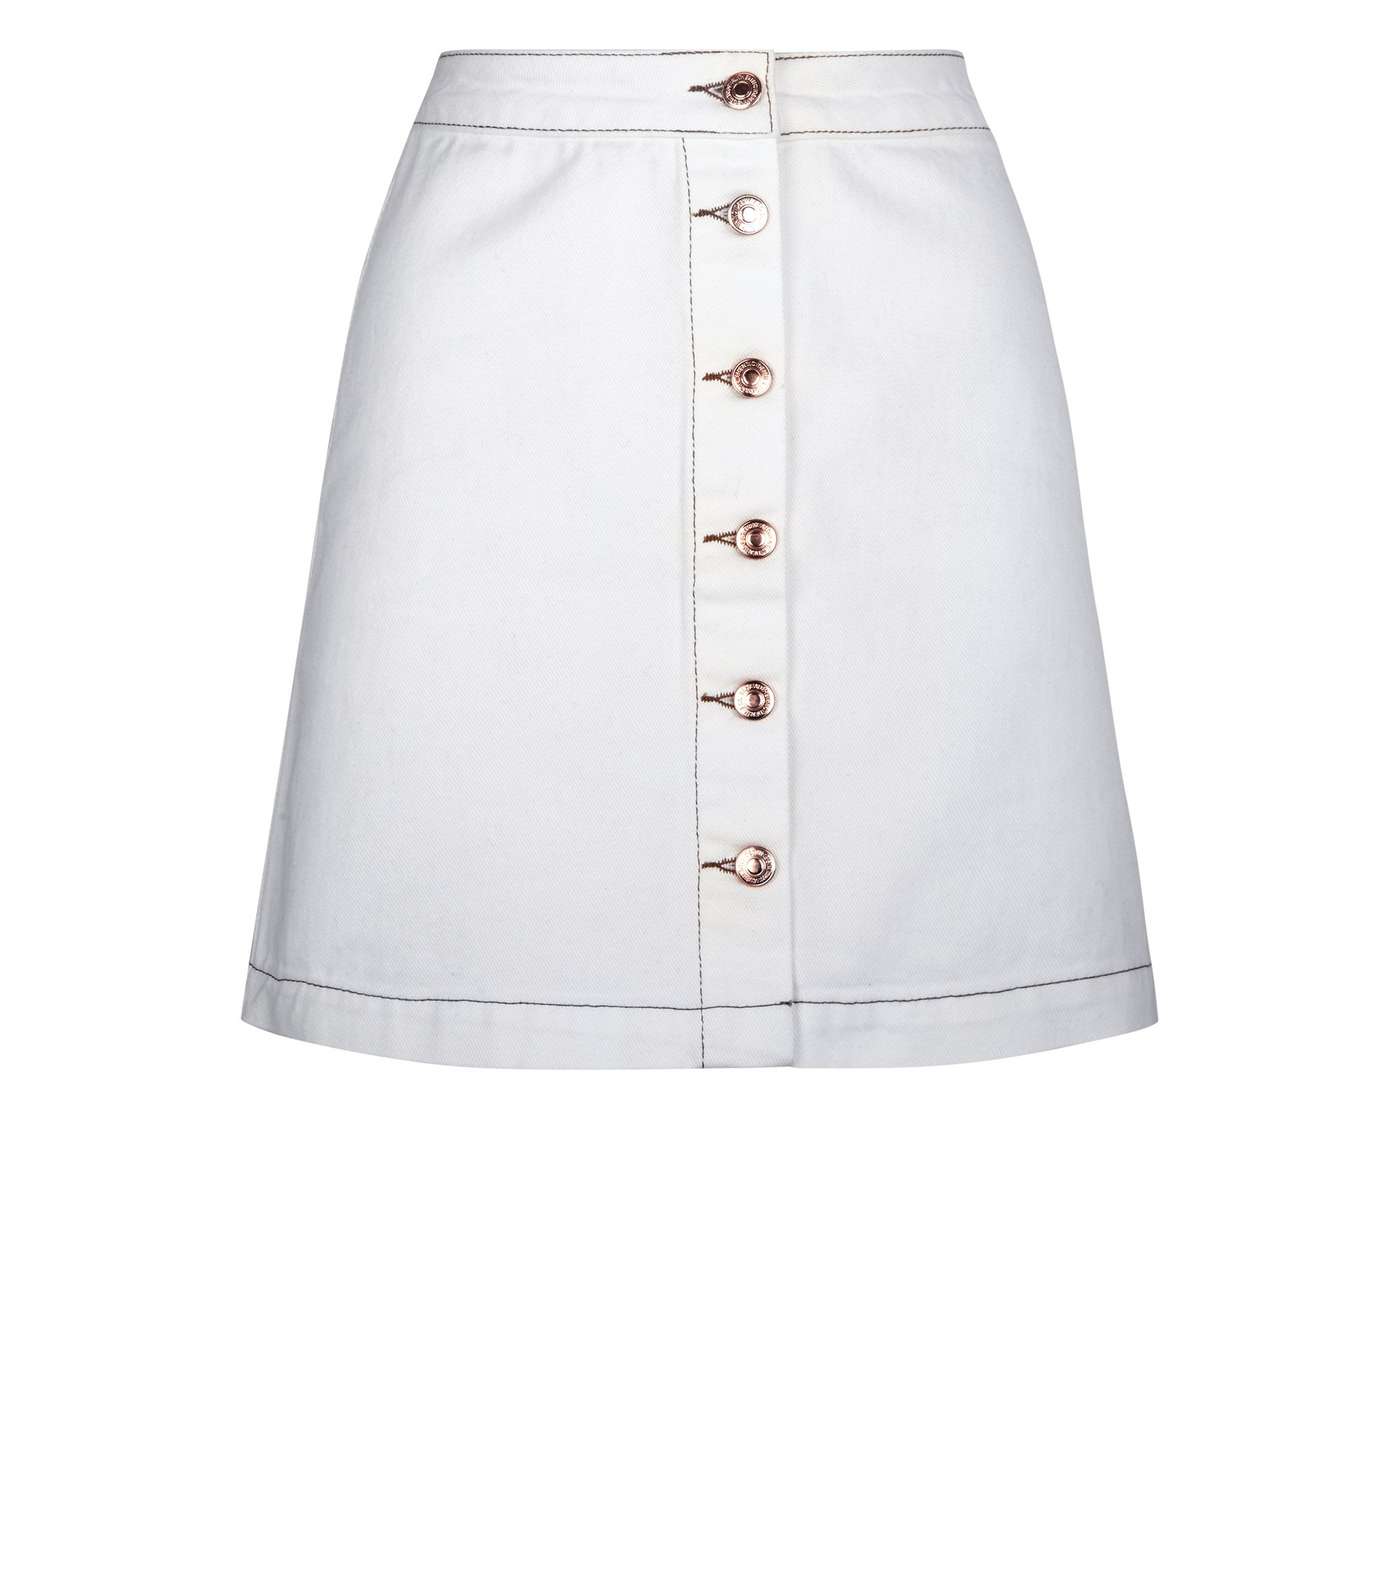 Off White Denim Button Front A-Line Skirt Image 4